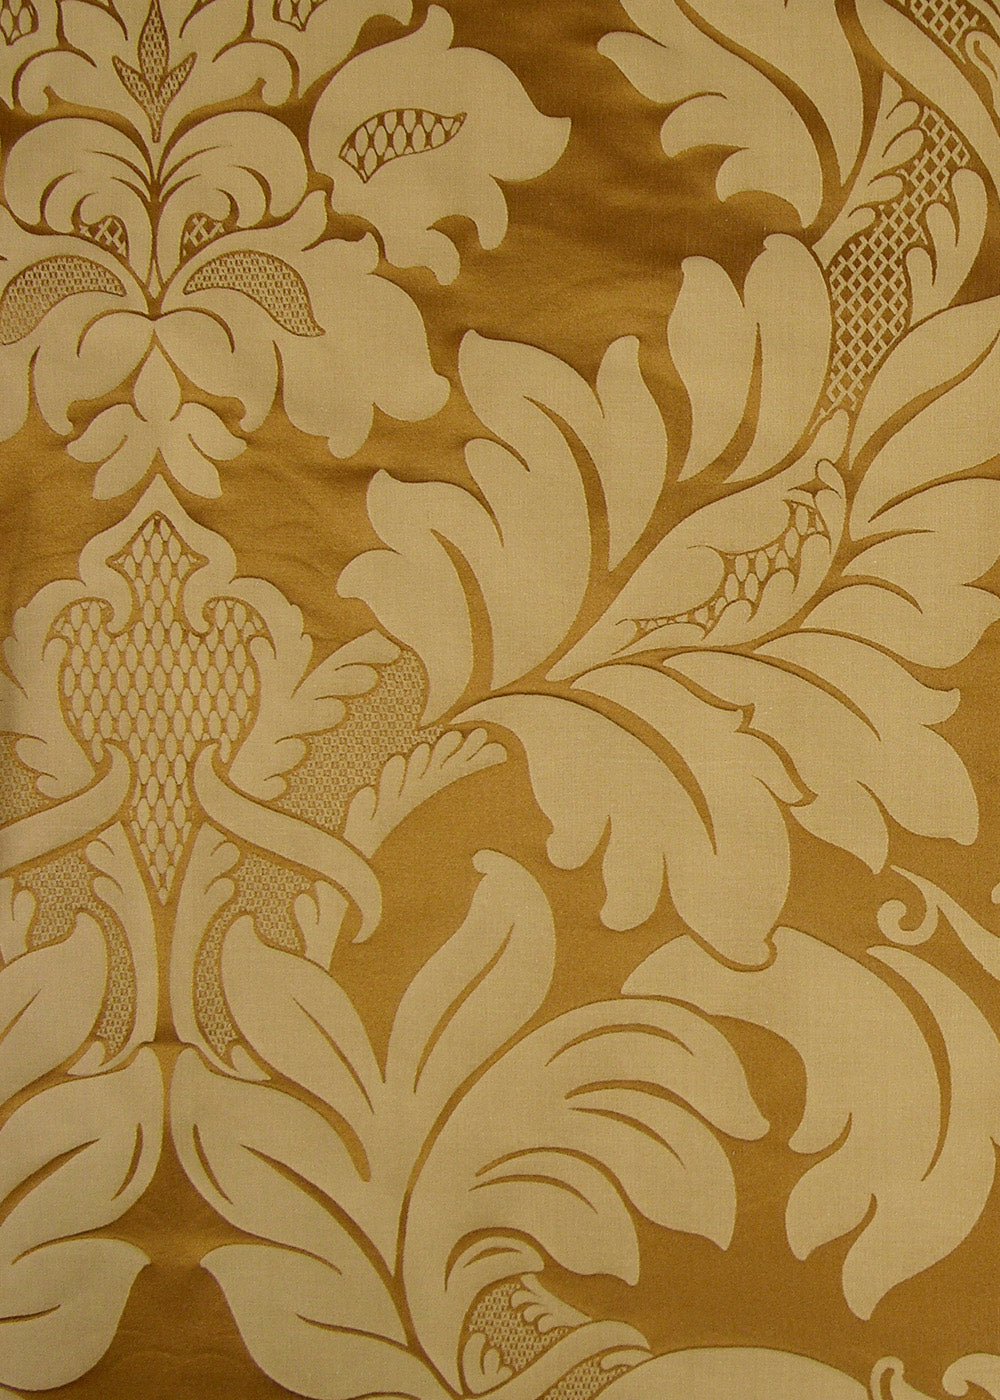 bronze satin fabric with a gold damask pattern